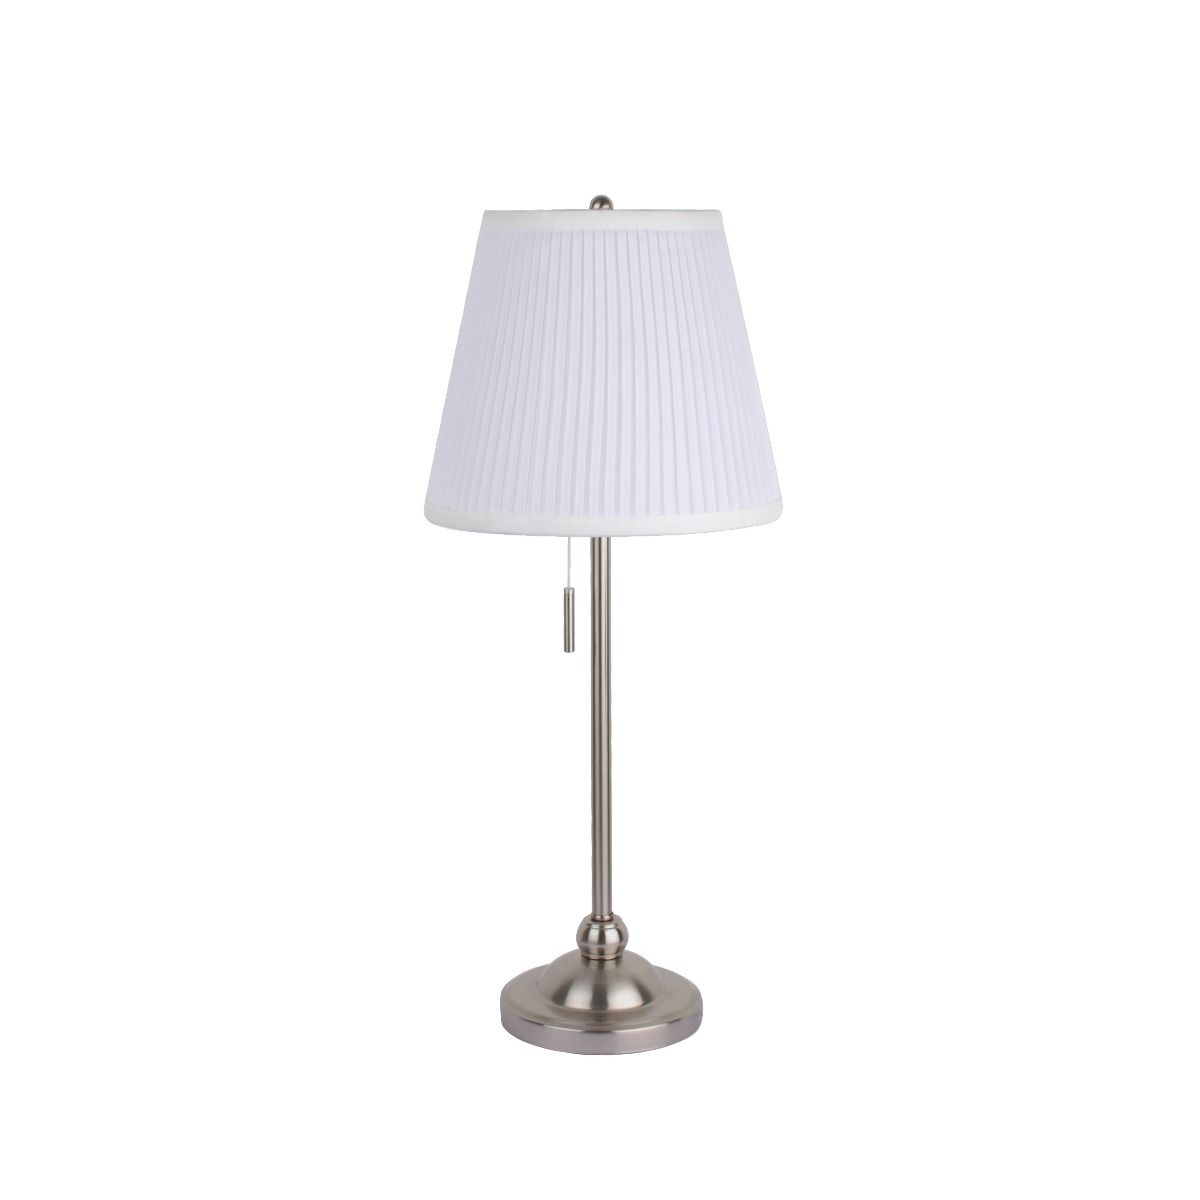 Ilsa Pull Switch Table Lamp Satin Nickel Table Lamp with Ivory Shade